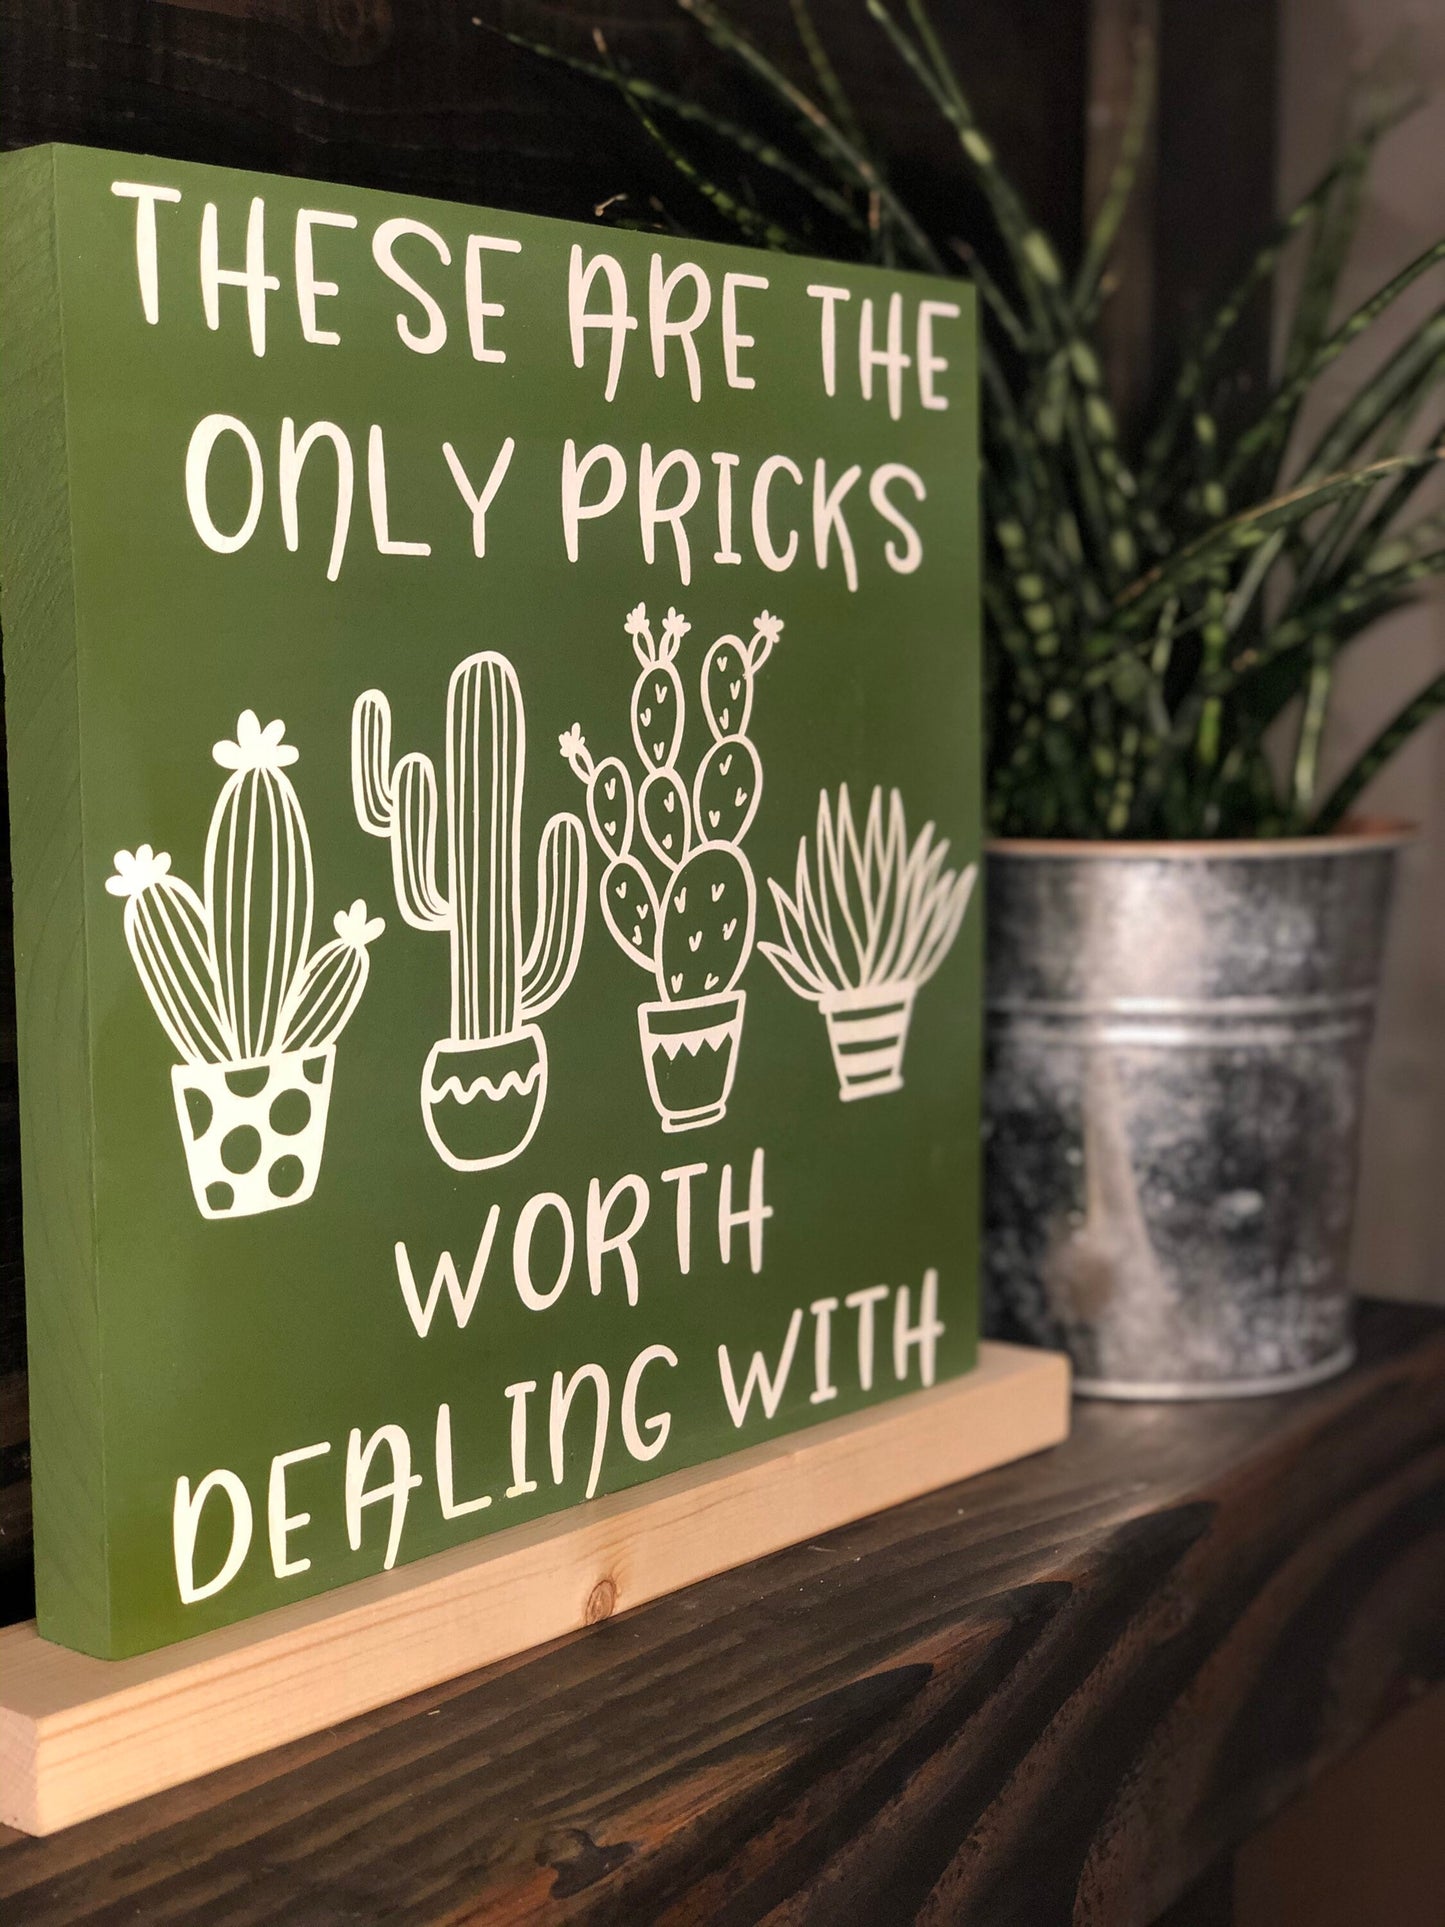 These Are The Only Pricks Worth Dealing With - Cactus Lovers - Plant Puns - Cacti Decor - Gift Ideas